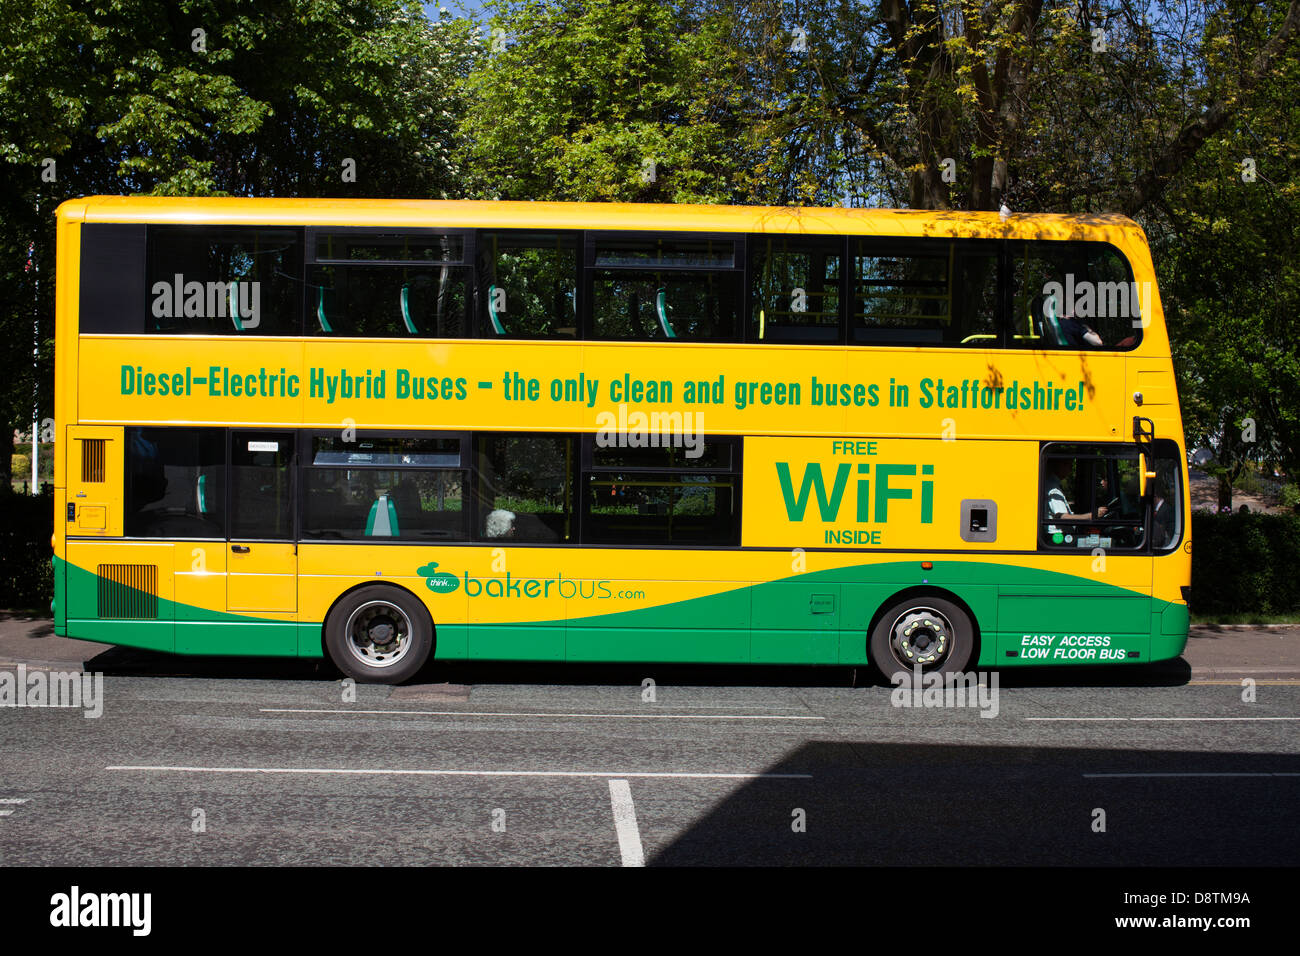 A diesel electric hybrid double decker bus painted green and yellow with wifi advertisement on a Baker bus in the UK Stock Photo